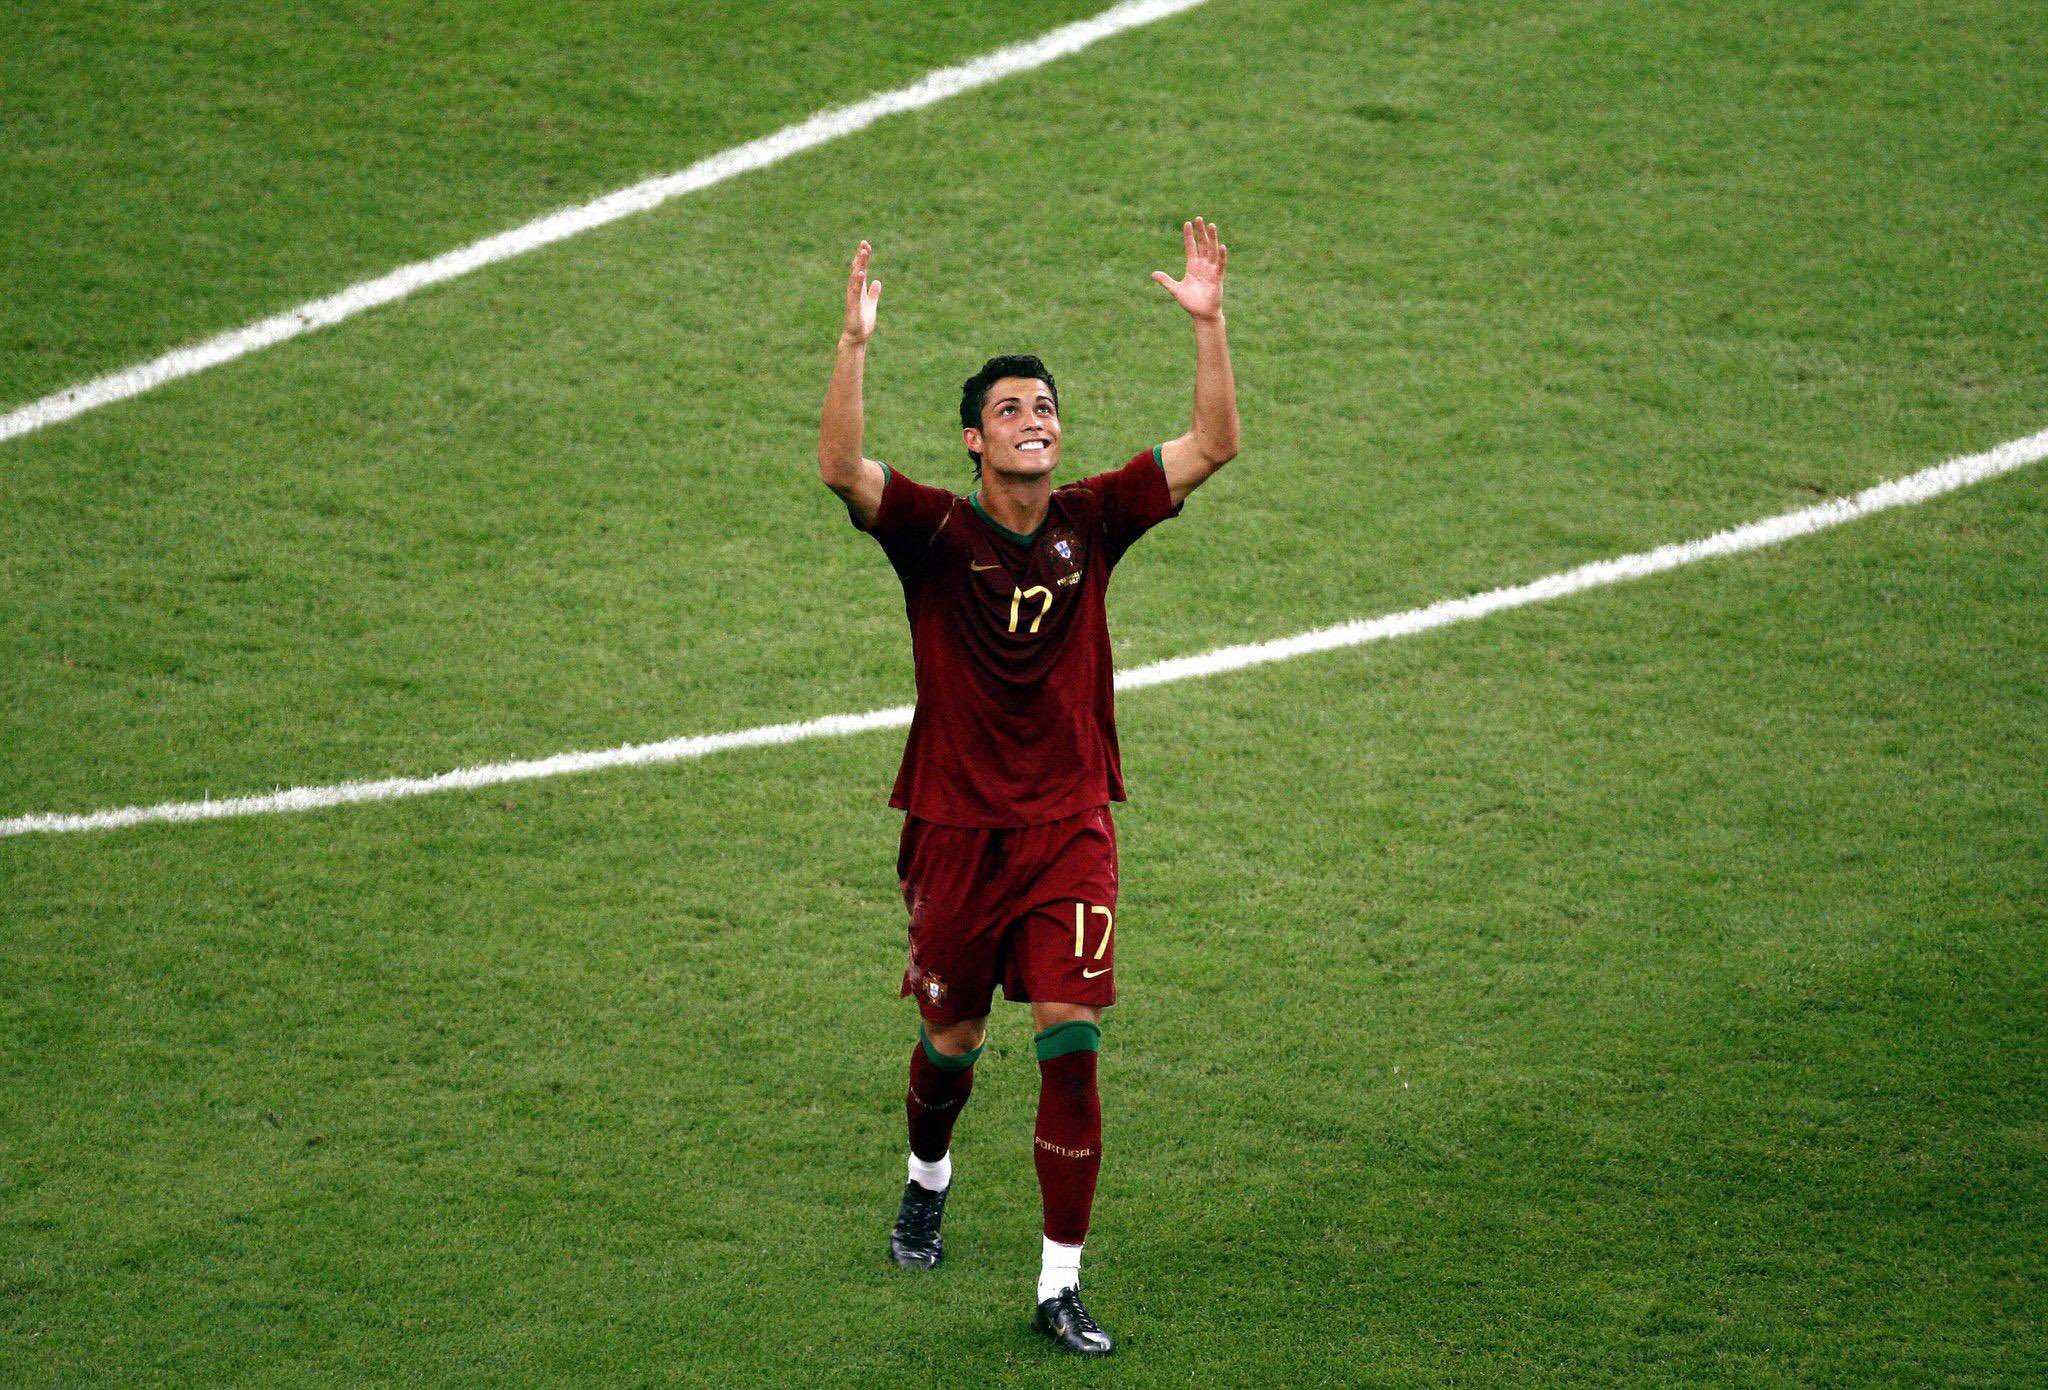 FIFA World Cup - #OnThisDay in 2006, Cristiano Ronaldo